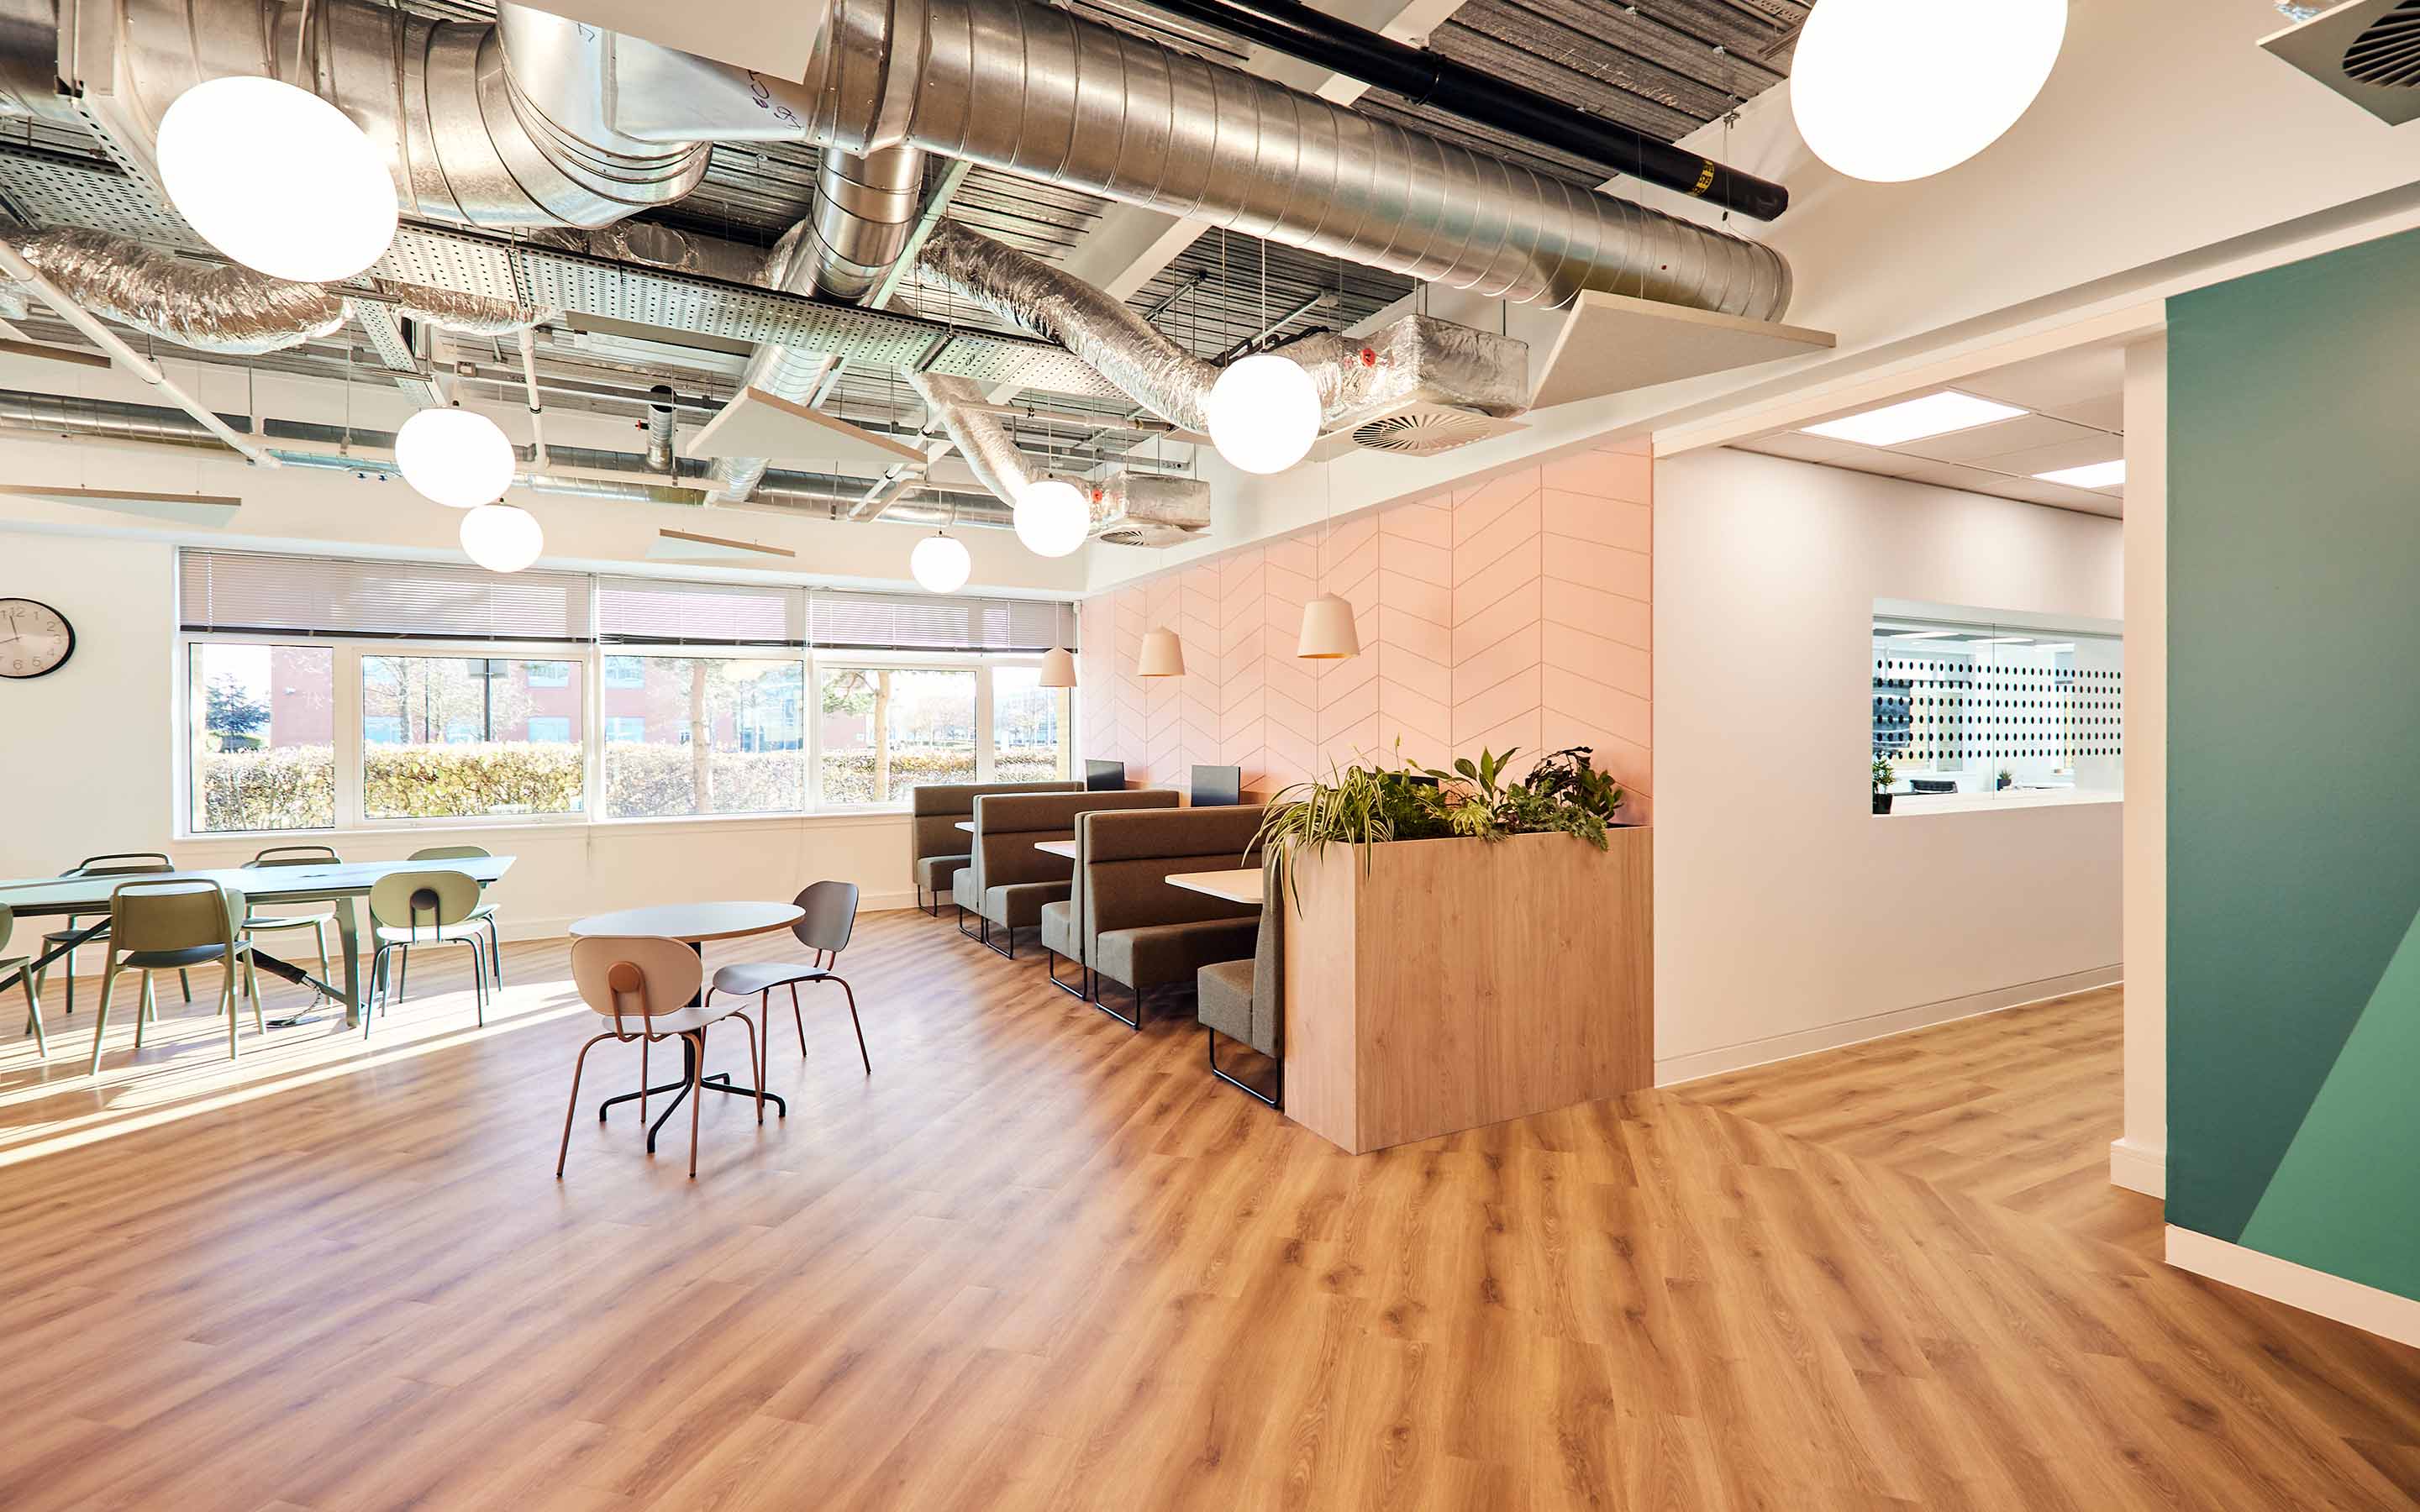 A professionally designed office space featuring wooden floors, breakout booth seating and a soft pink joinery walls, creating a vibrant and inviting atmosphere